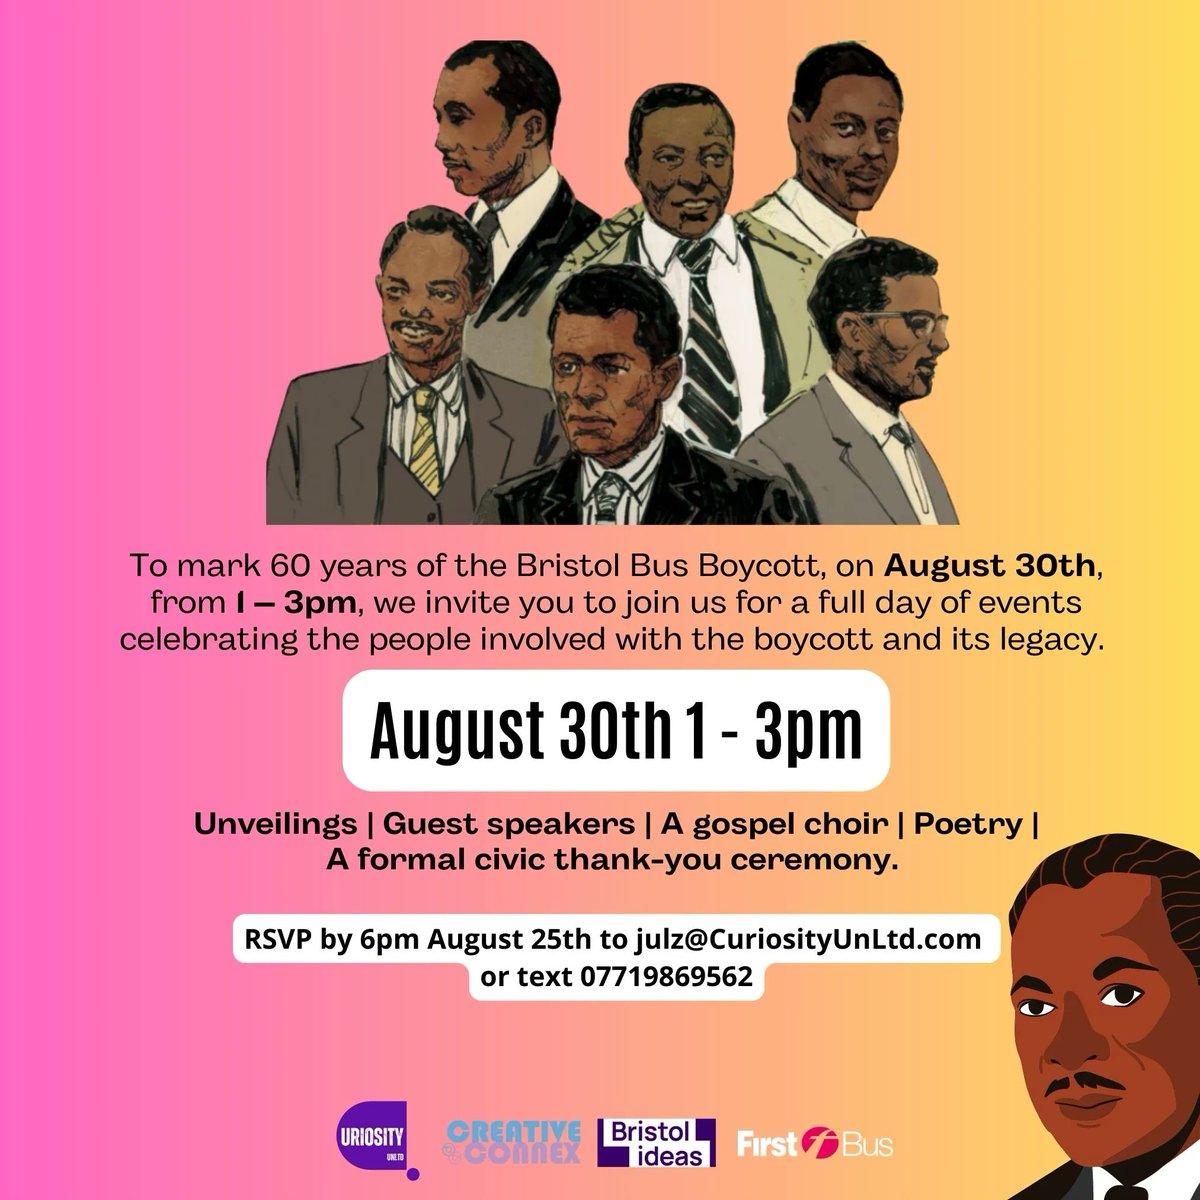 Yesterday marked the 60th anniversary of the #BristolBusBoycott. On Aug 30 a thankyou ceremony is being held with the pioneers at St Mary Redcliffe Church. RSVP for free tickets: bit.ly/3qNE15X Watch the #RaceForPower video: bit.ly/3stQXOW @Curiosity_UnLtd